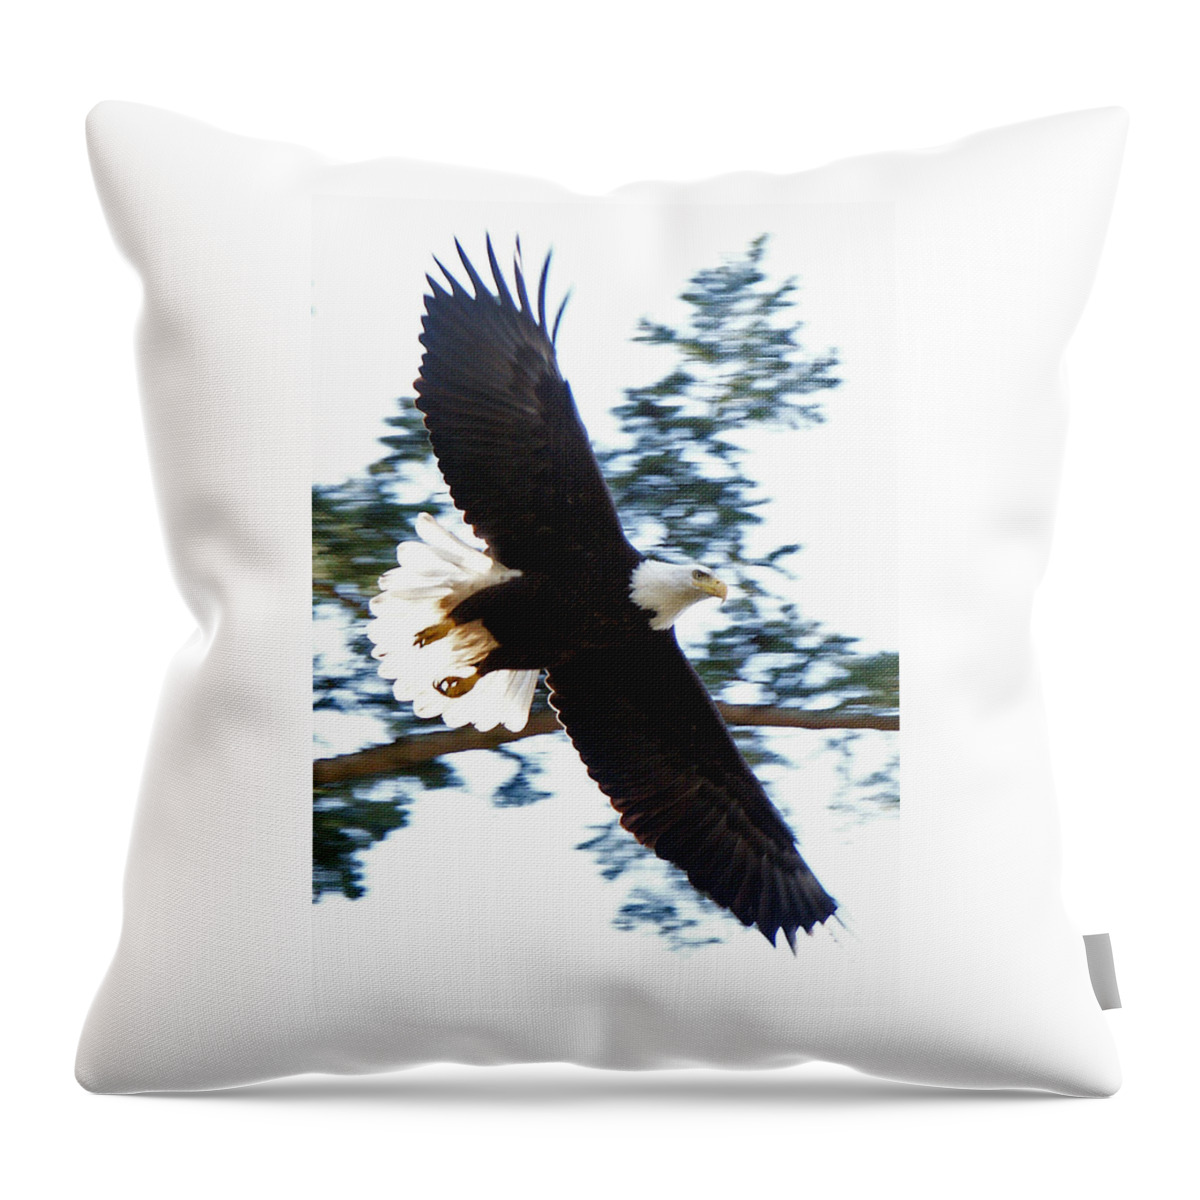 Eagle Throw Pillow featuring the photograph Eagle Eye by David Zinkand